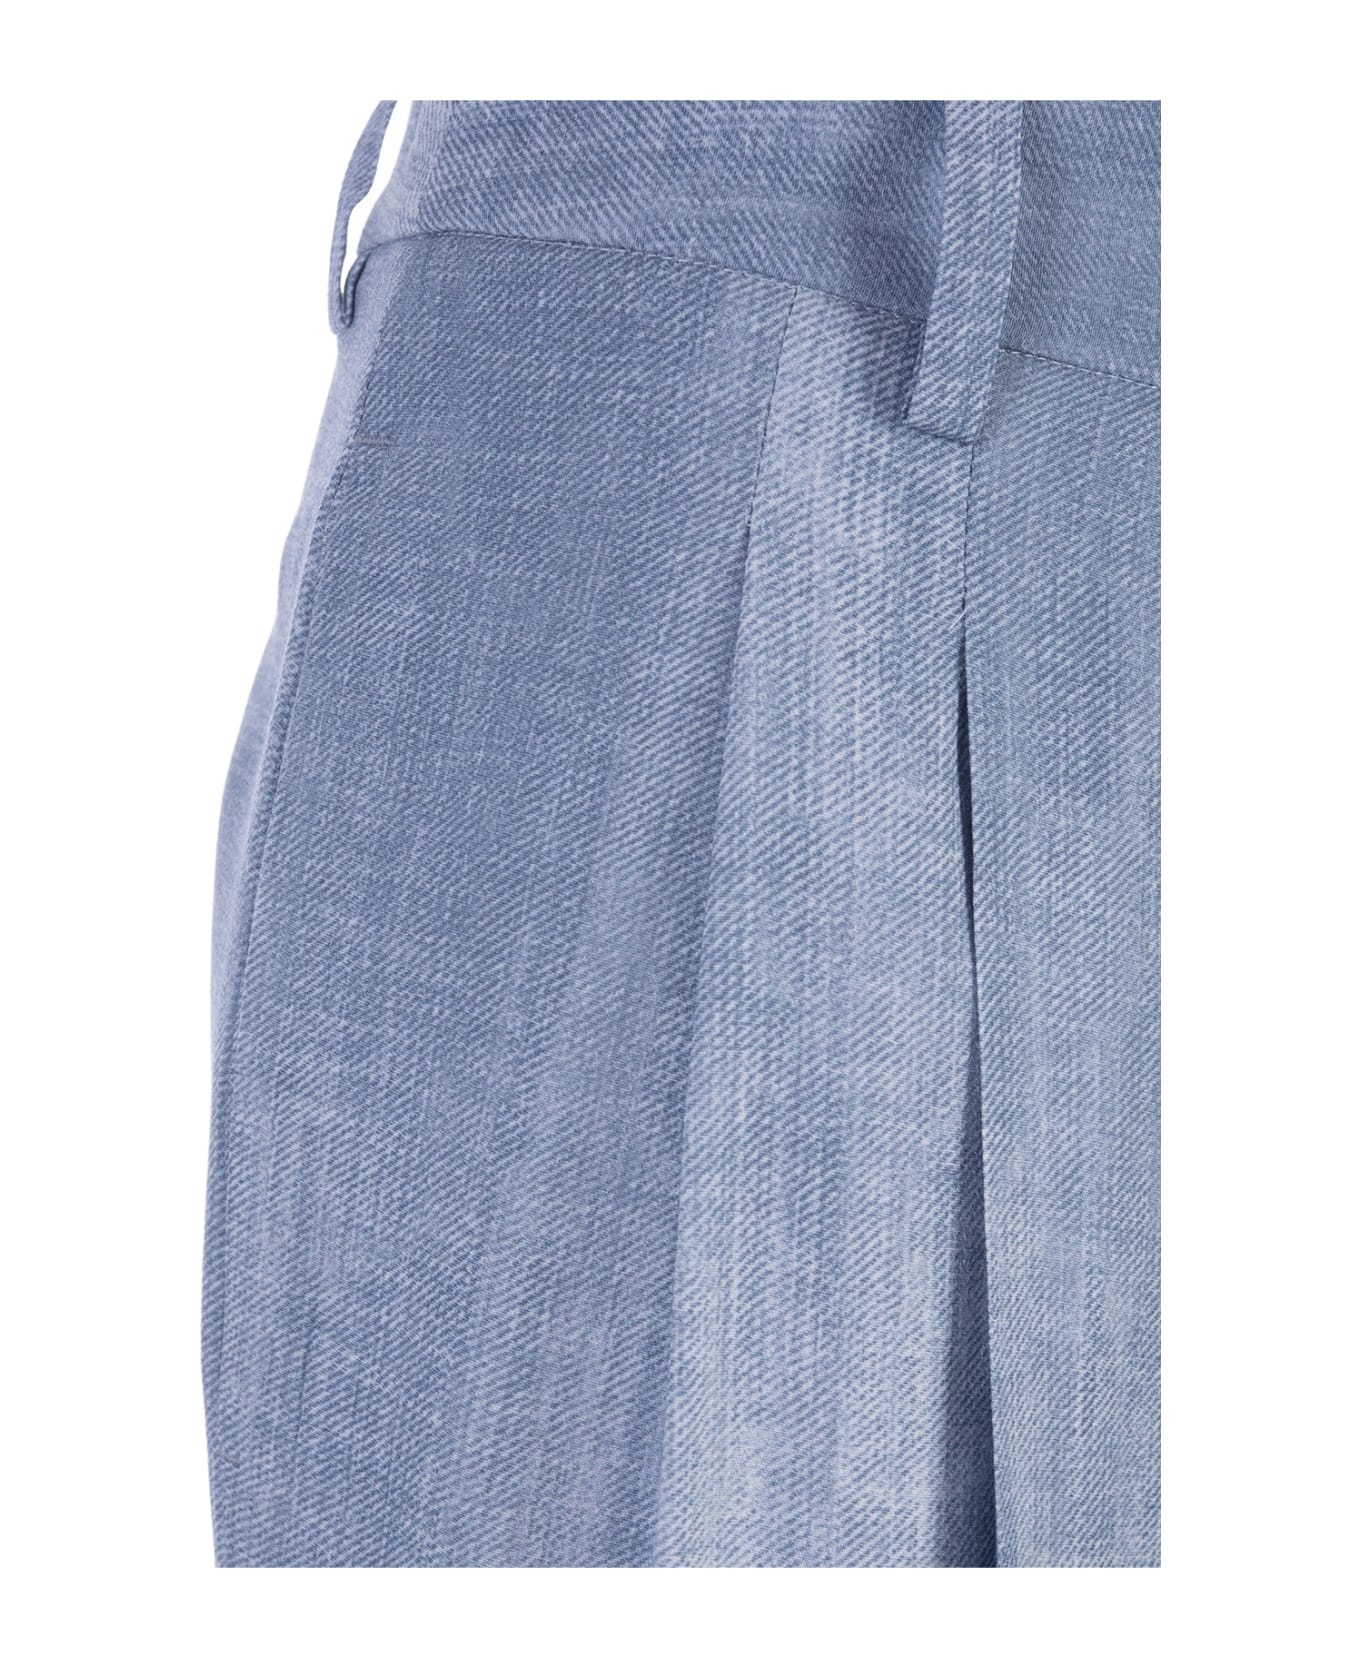 Ermanno Scervino Marocain Palace Trousers - Blue ボトムス